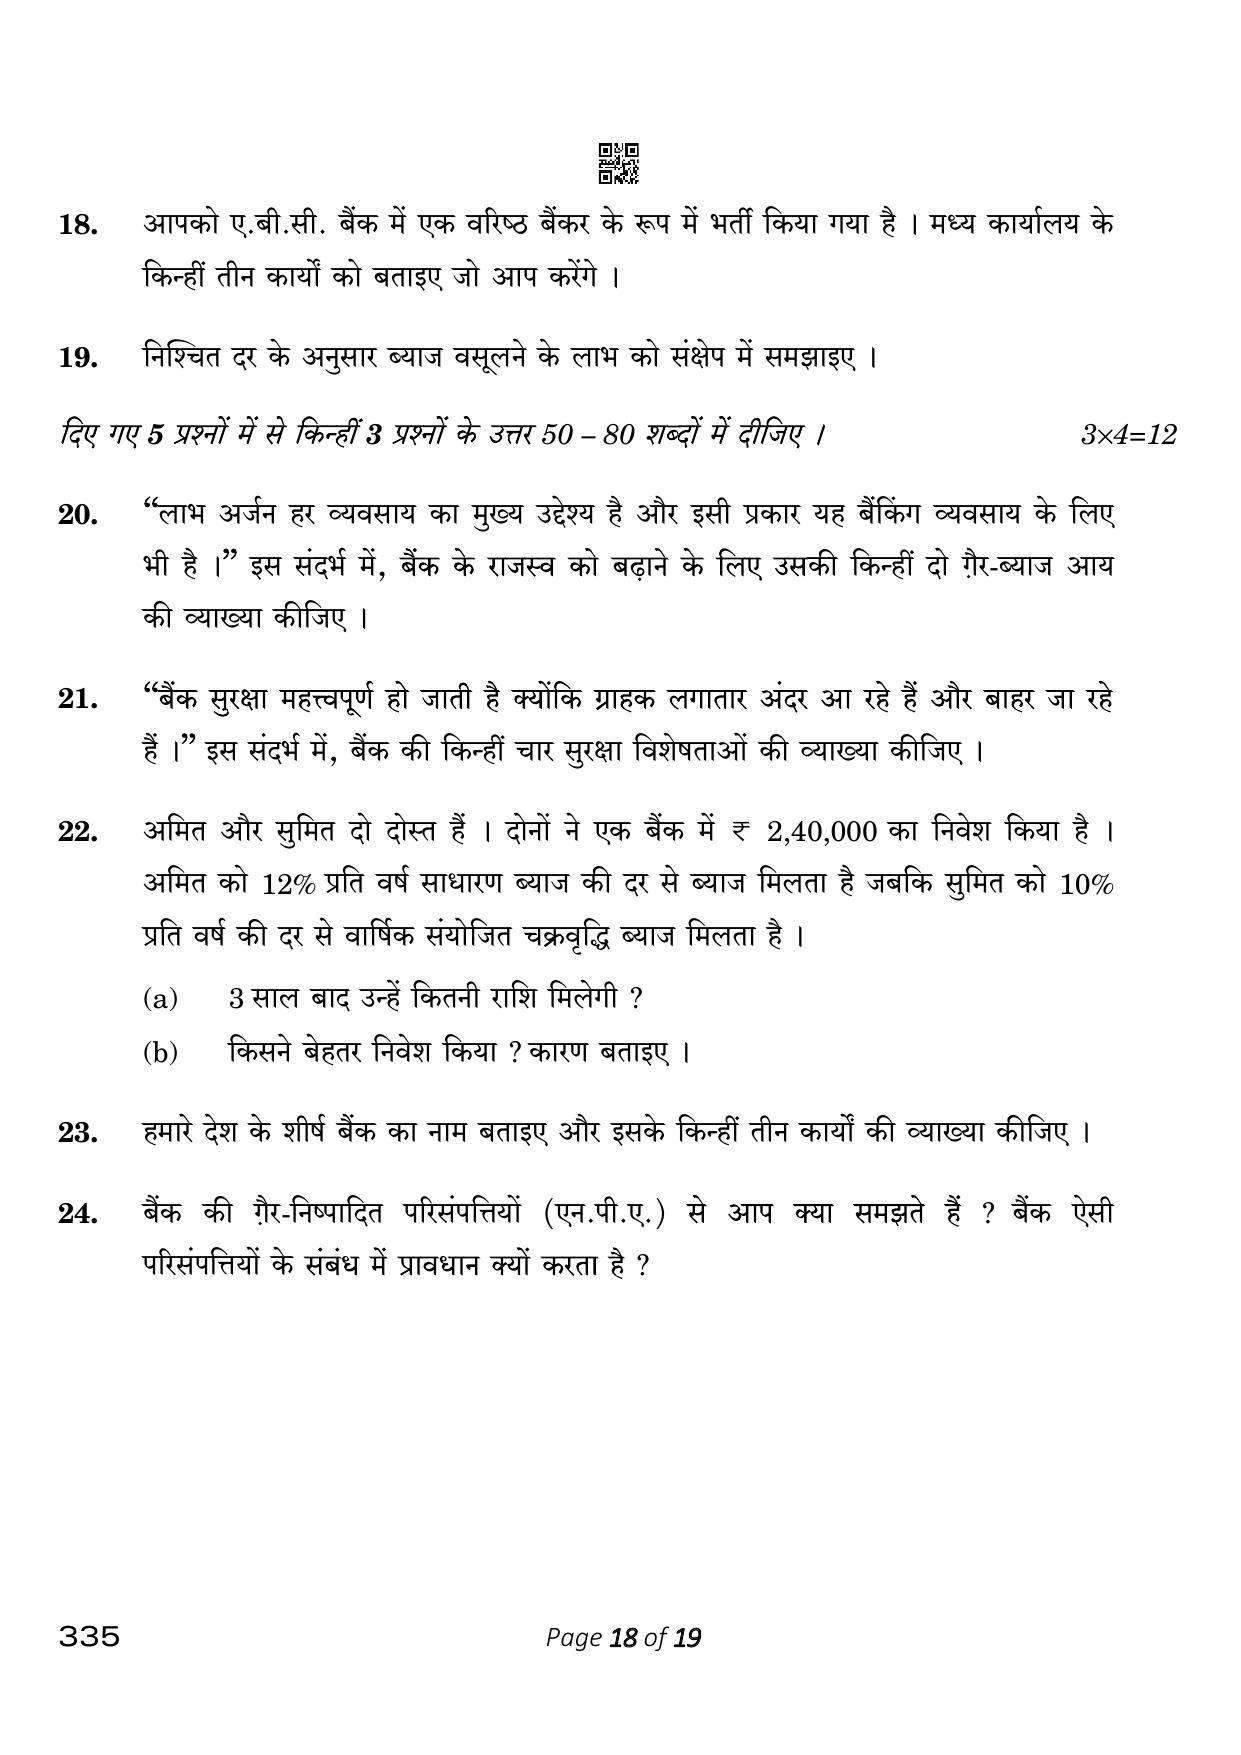 CBSE Class 12 335_Banking 2023 Question Paper - Page 18